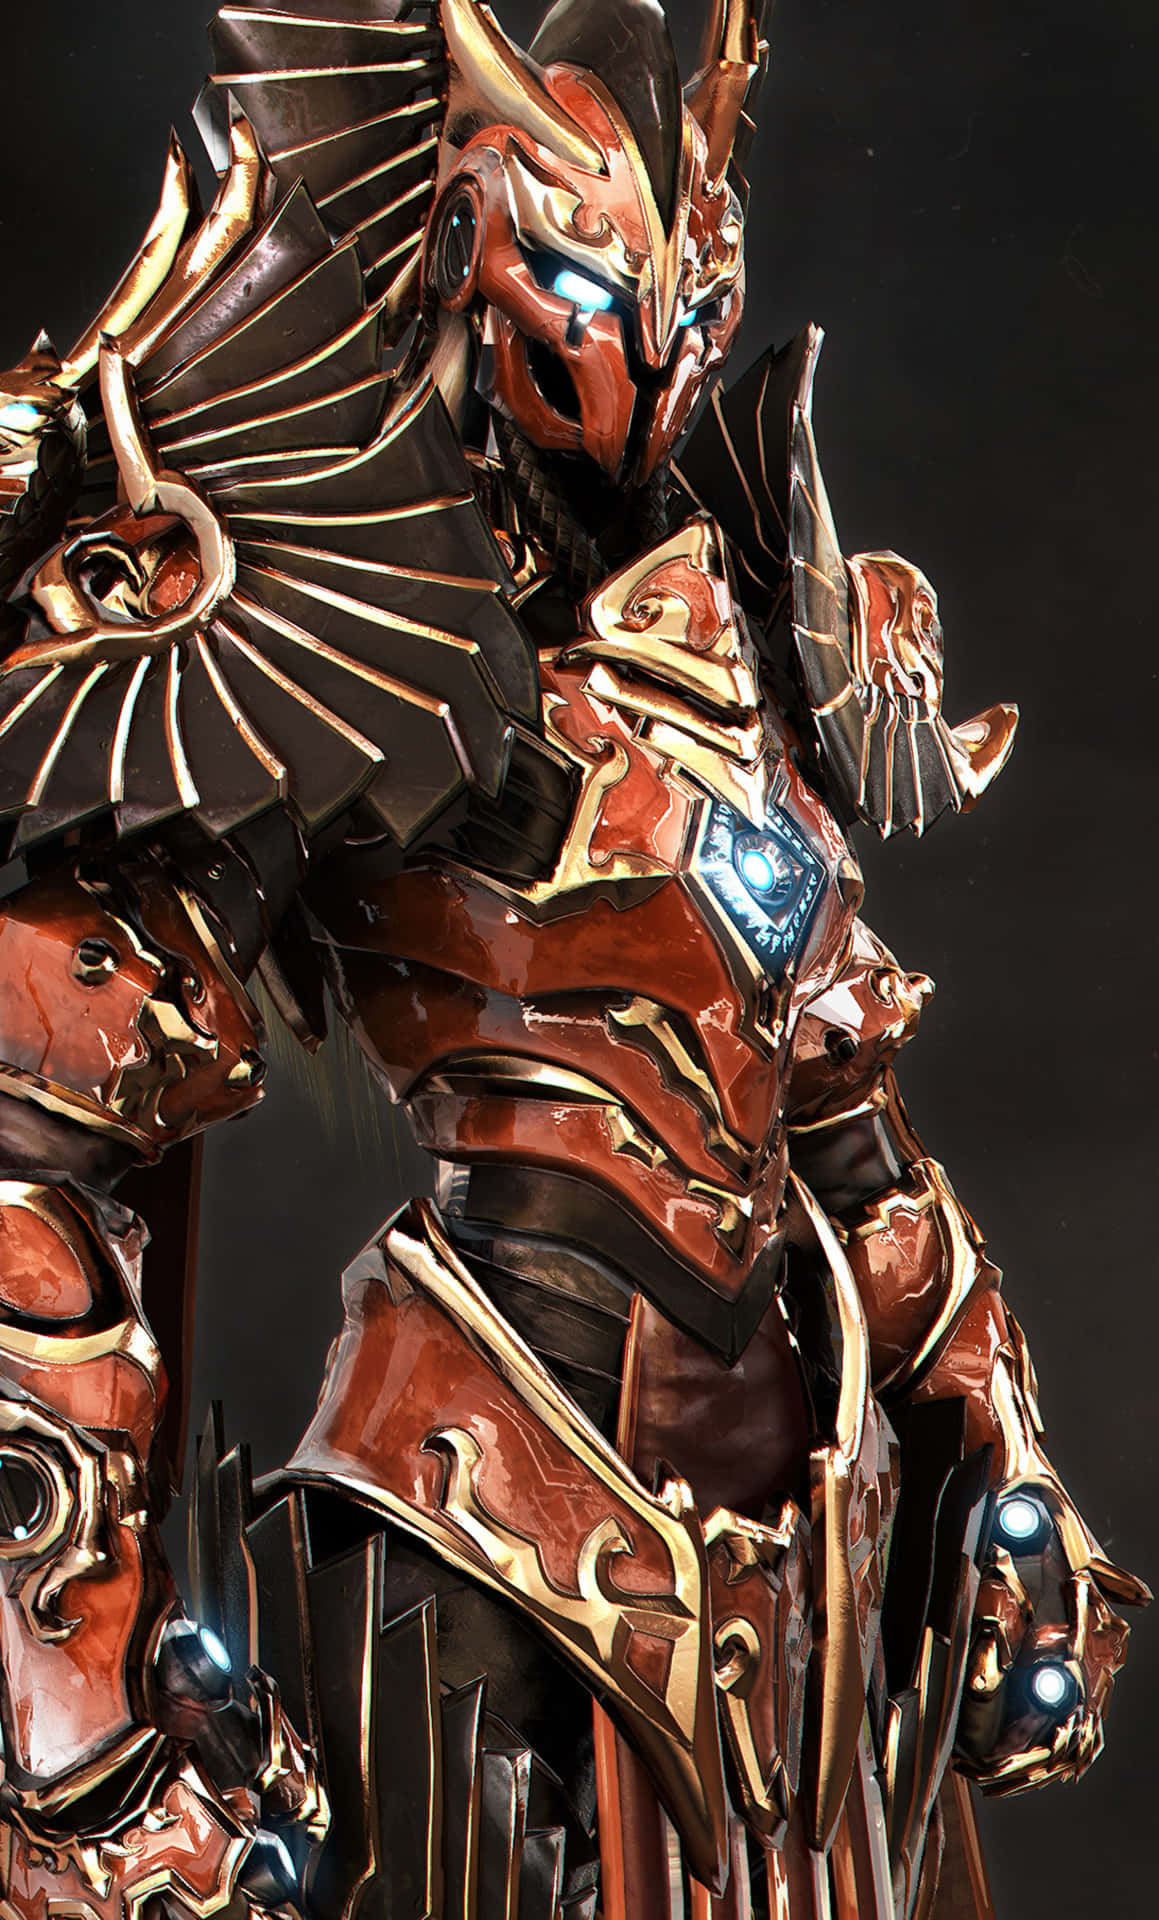 A 3d Model Of A Warrior In Armor